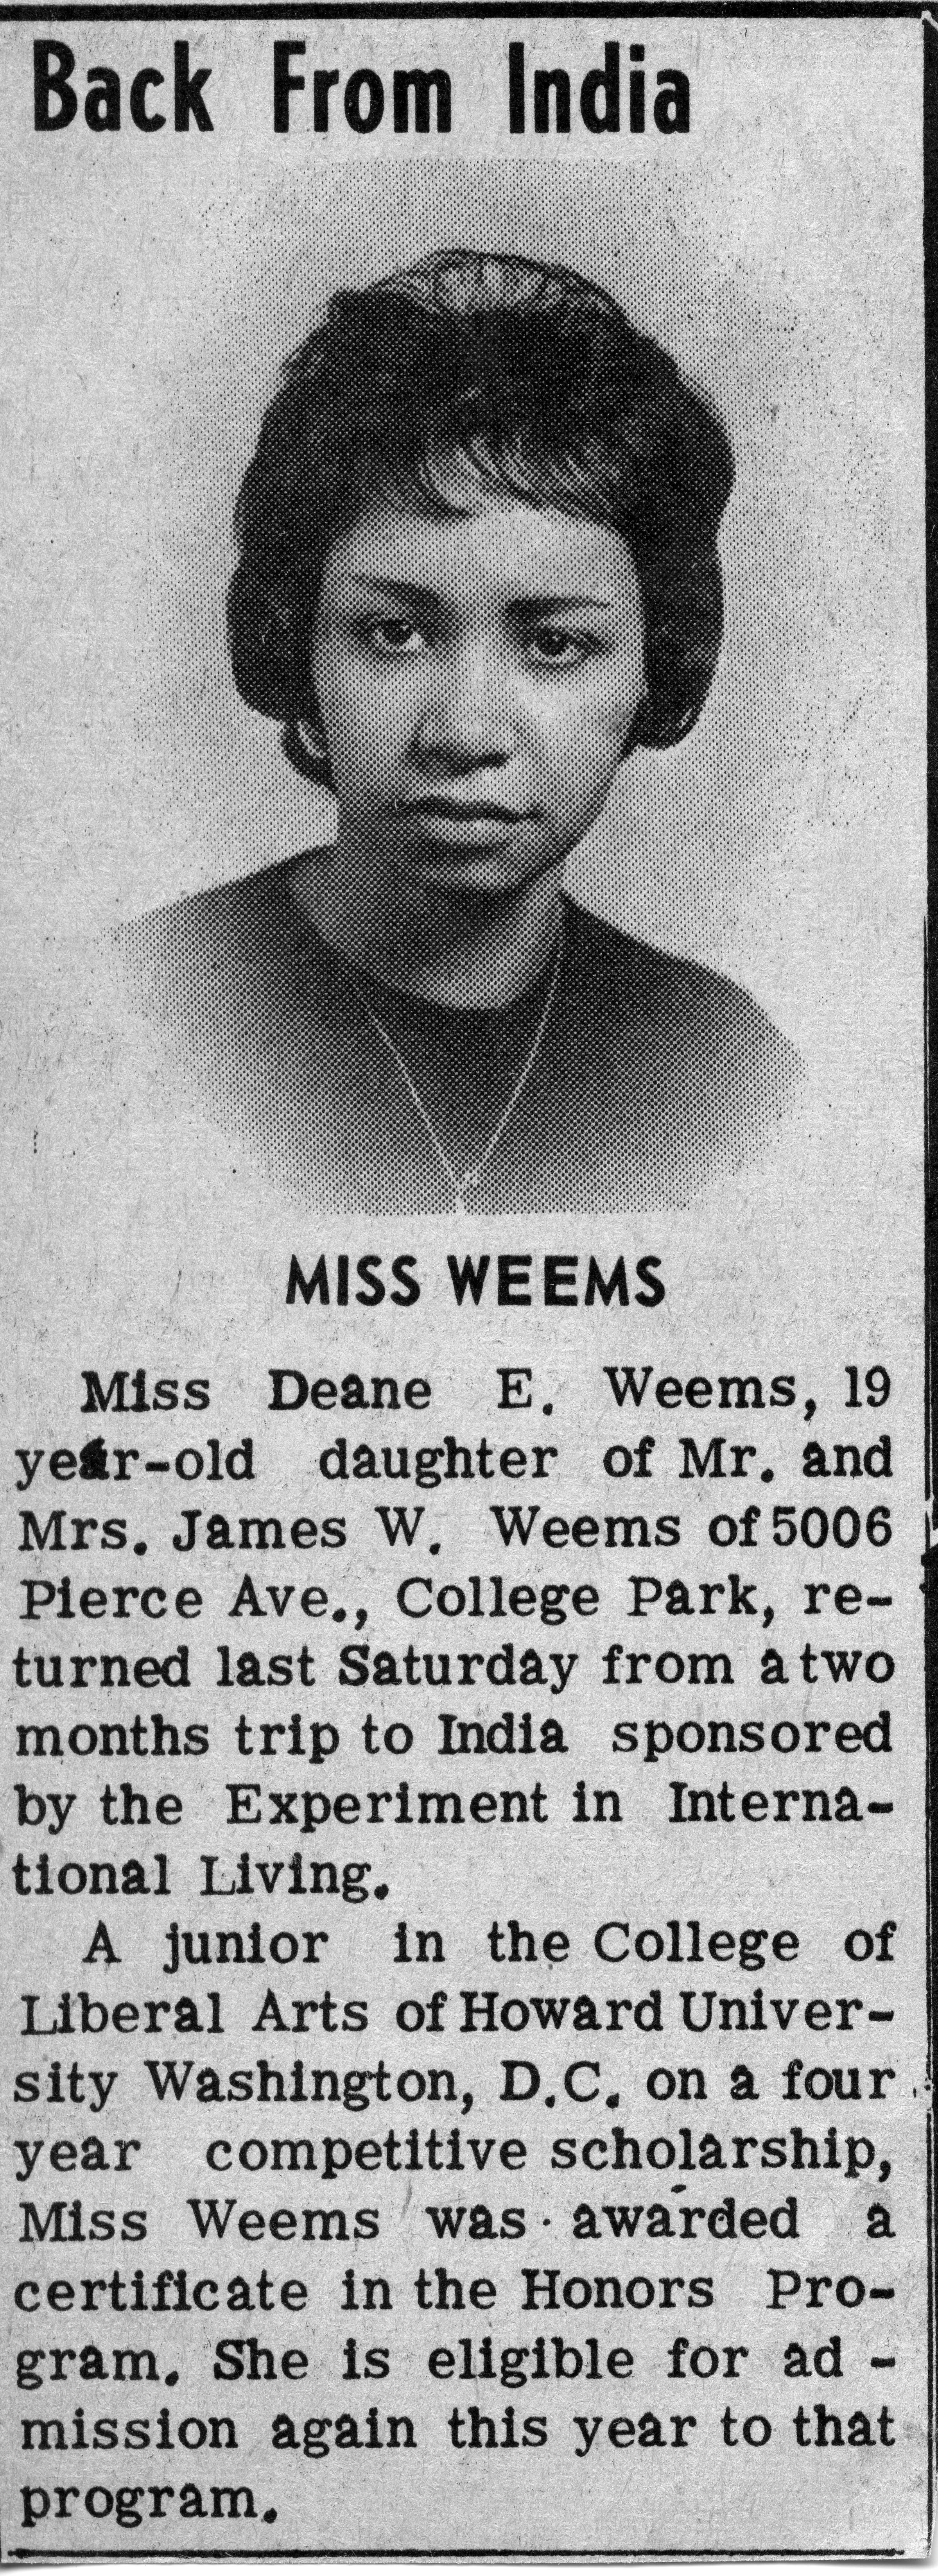 Newspaper clipping "Back From India" Diane Weems